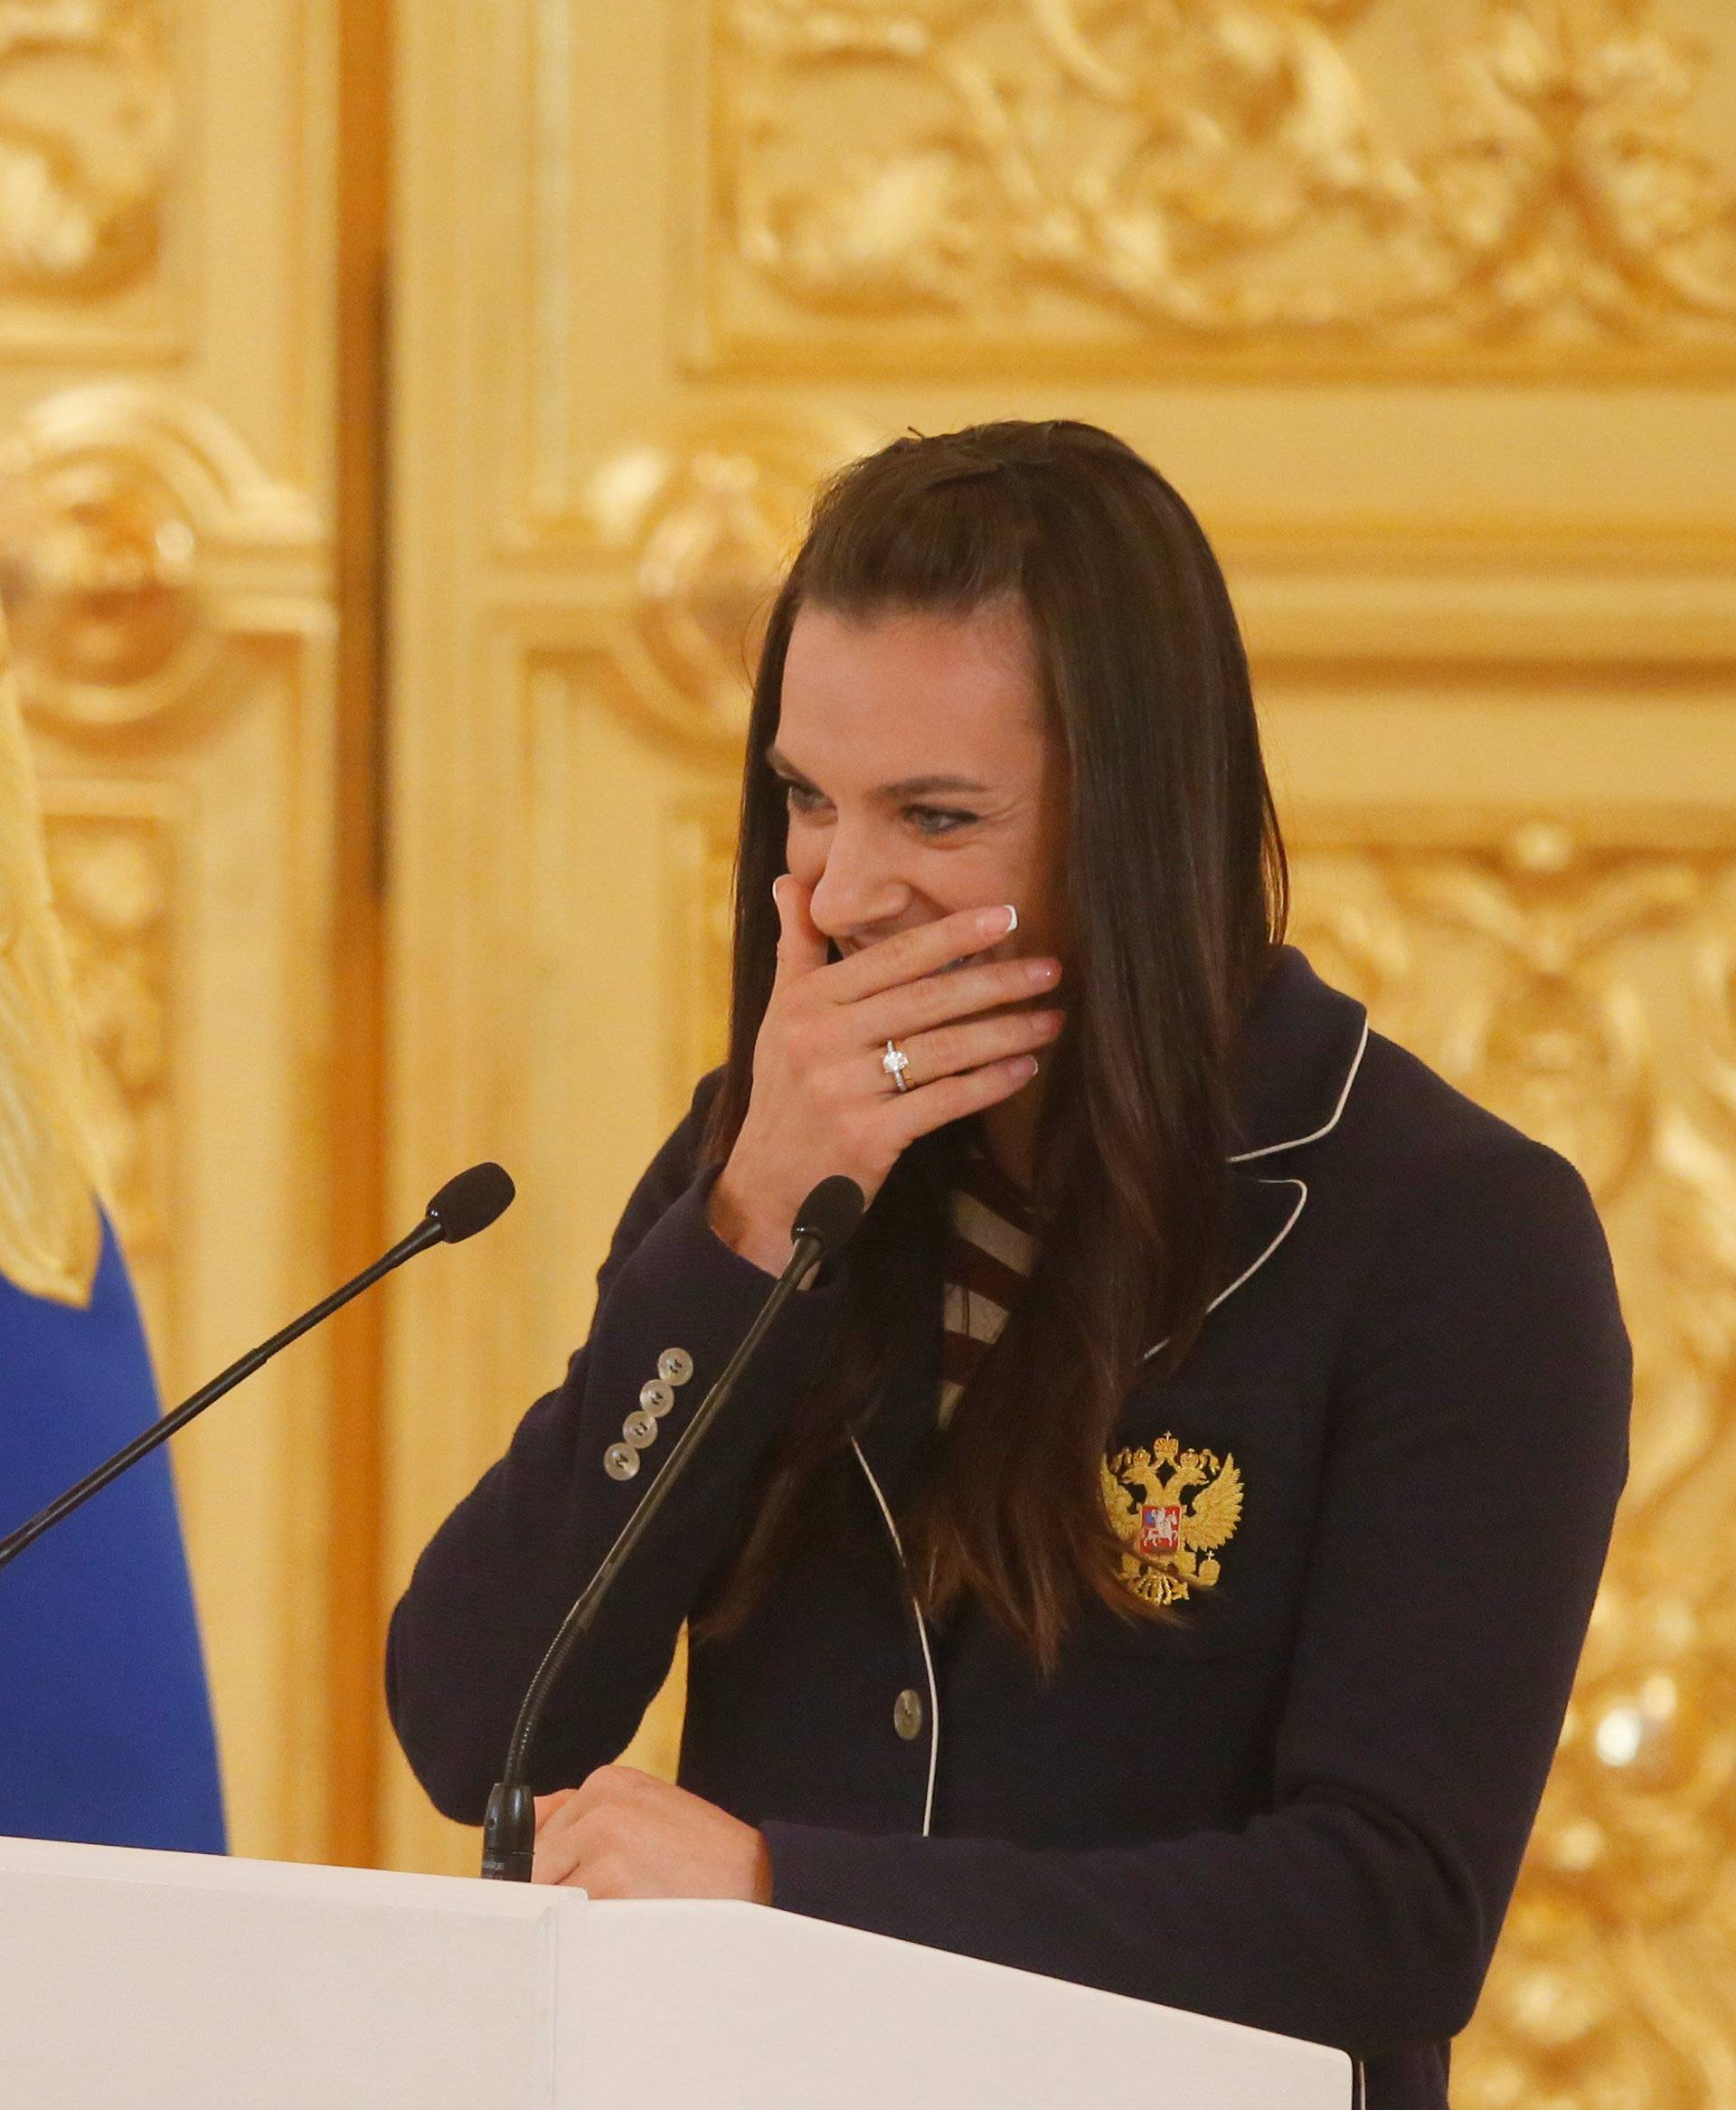 Track-and-field athlete Isinbayeva reacts as she speaks during Russian President Putin's personal send-off for members of Russian Olympic team at Kremlin in Moscow